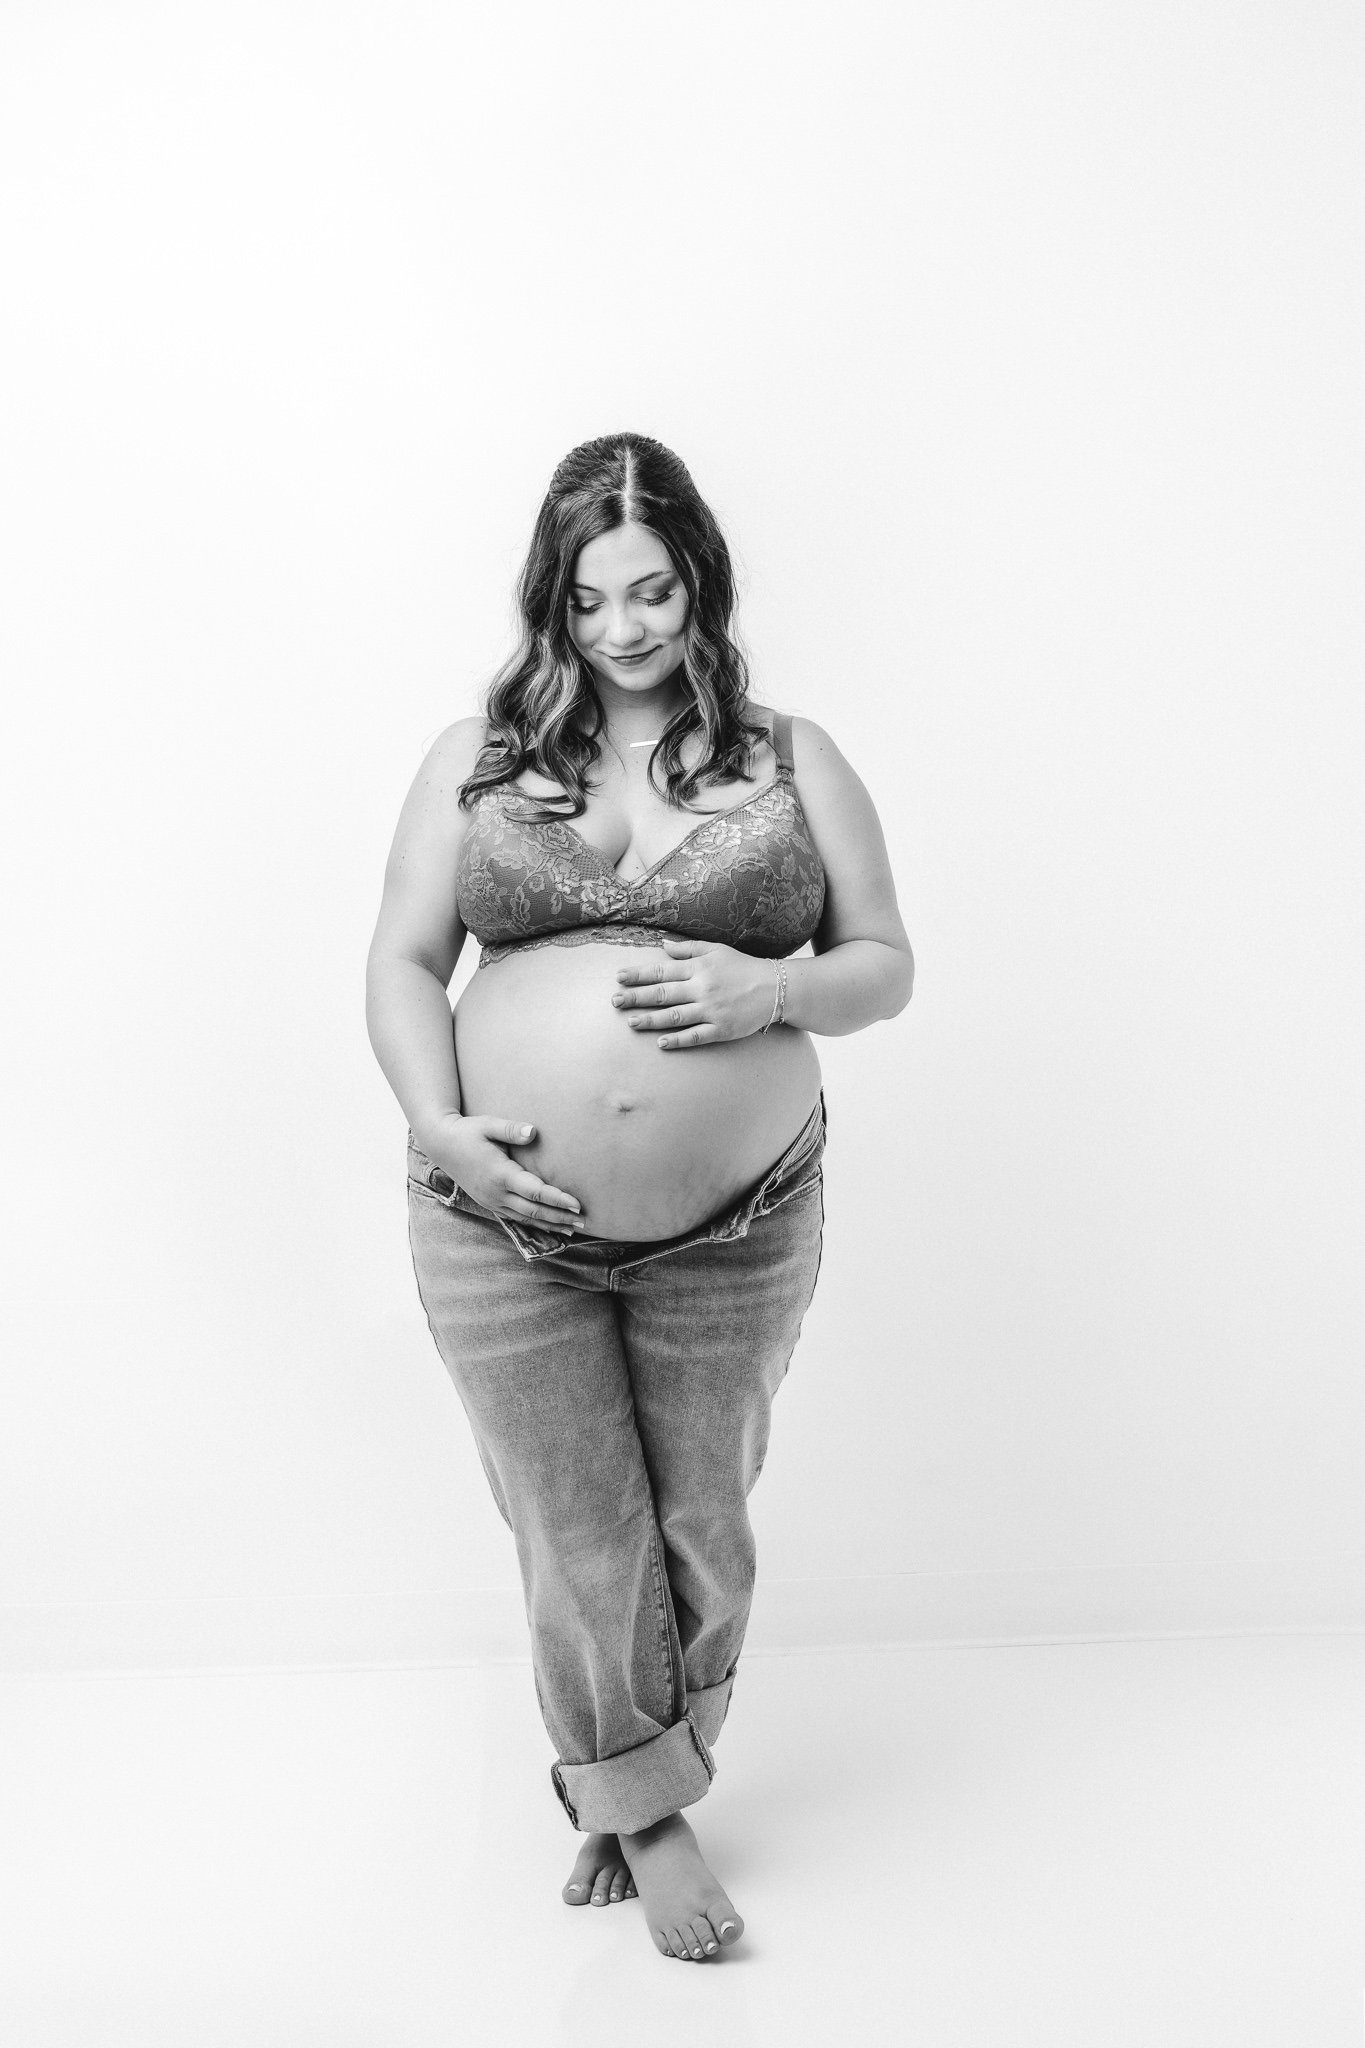  In a white studio in NJ Nicole Hawkins photography captures a portrait of a mother holding her baby bump. white studio jean and bra maternity portrait #NicoleHawkinsPhotography #NicoleHawkinsMaternity #Babyontheway #studiomaternityNJ #whitestudiomat